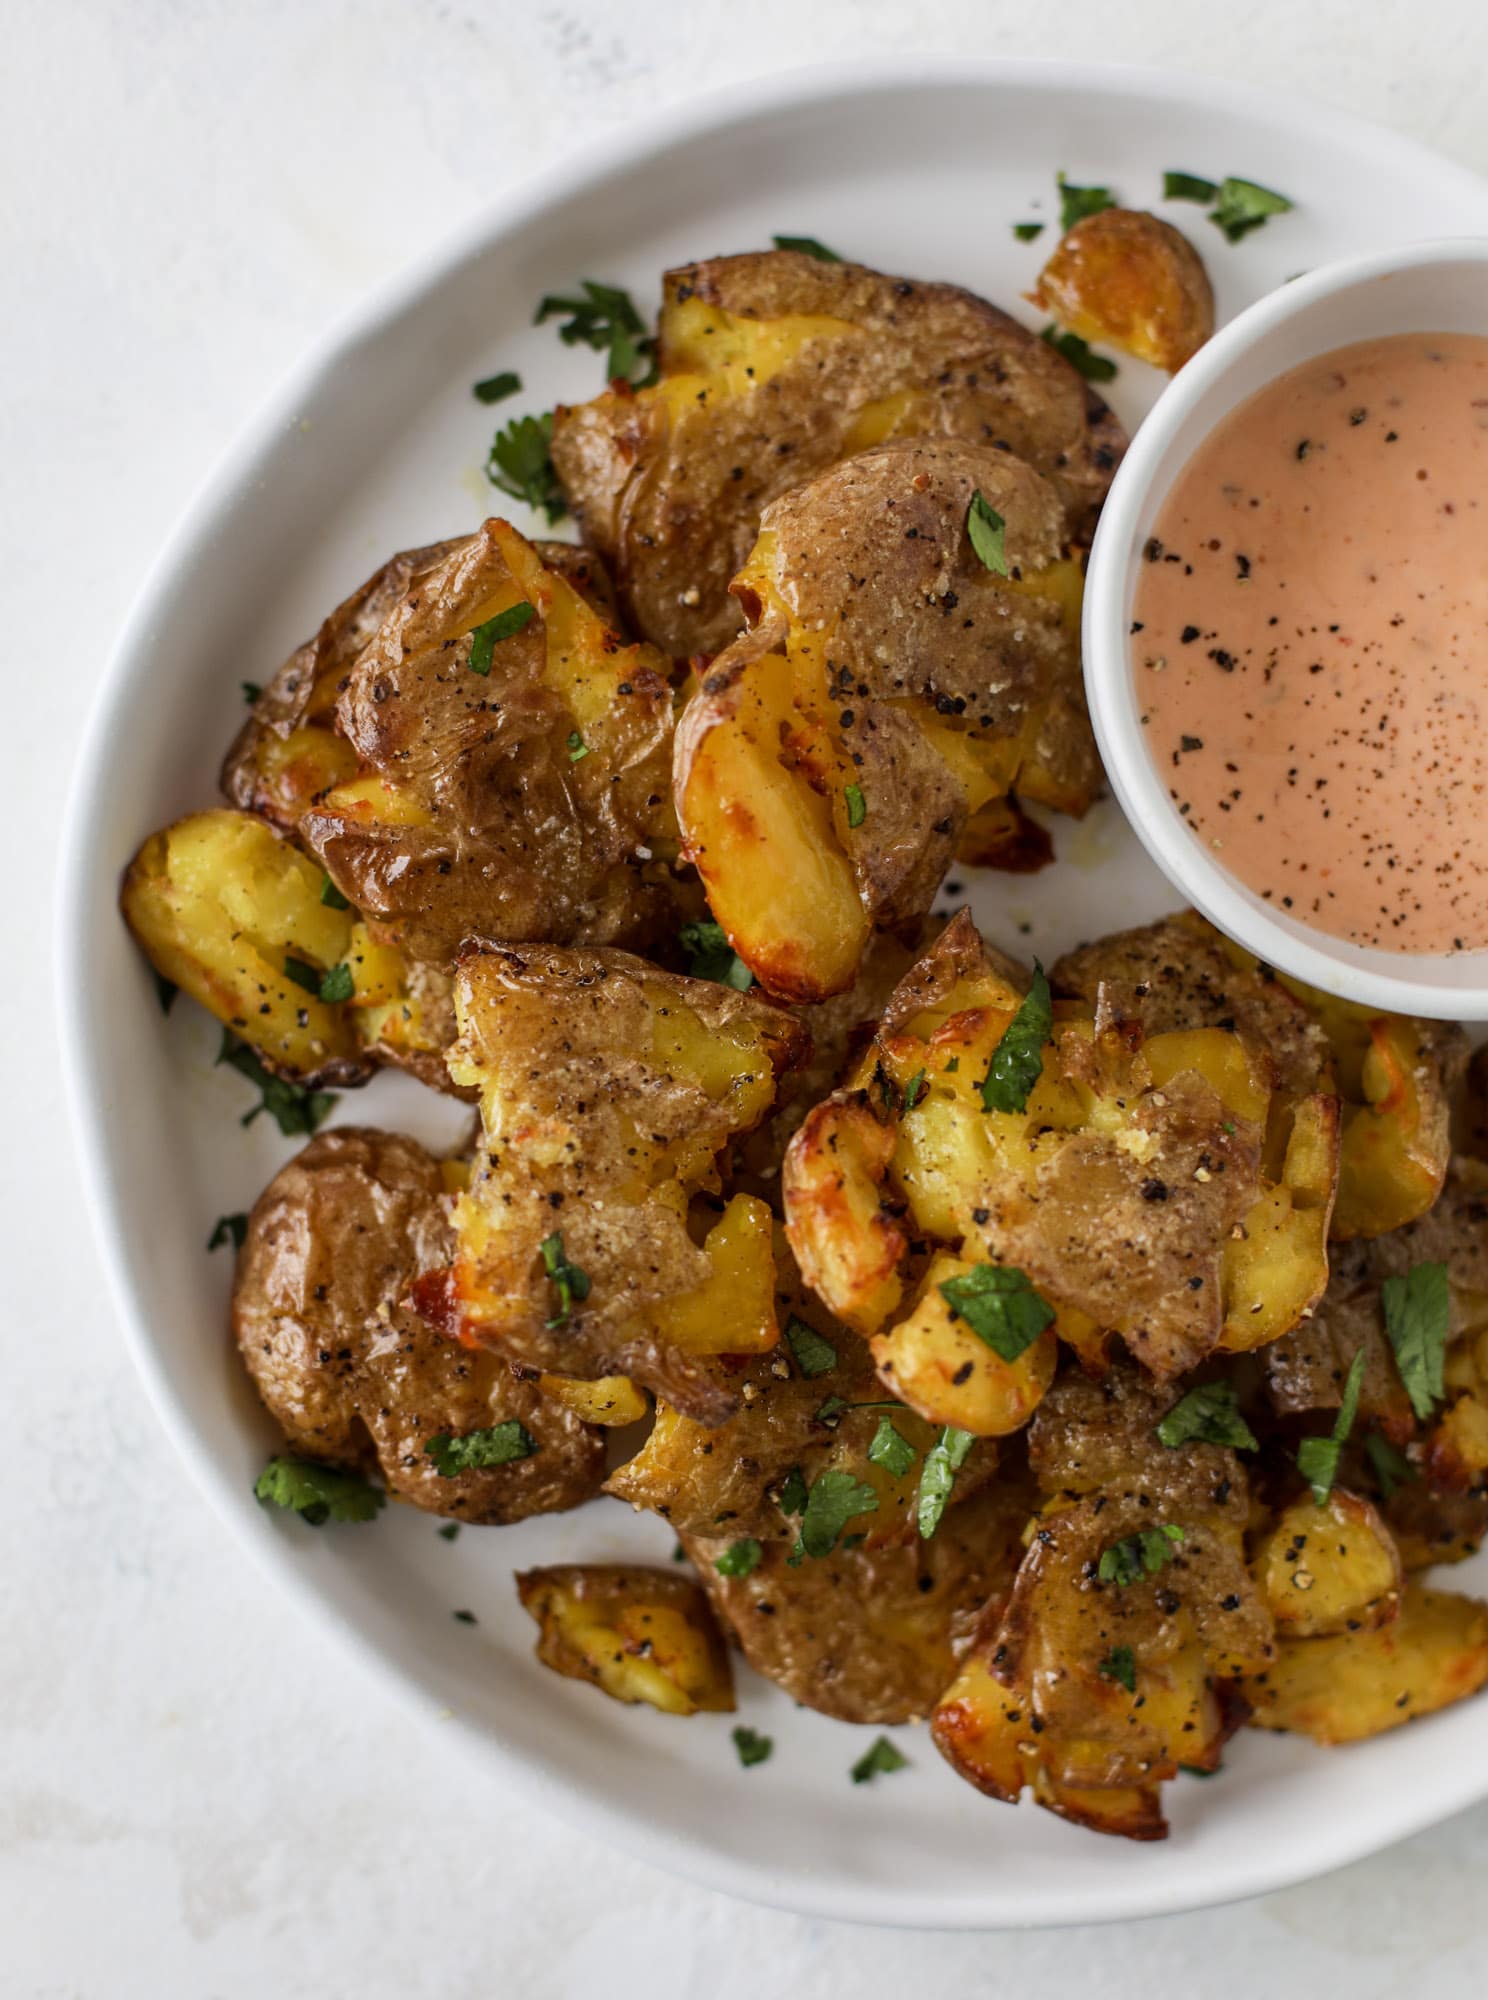 This is our favorite side dish ever! Crispy smashed potatoes roasted in the oven to perfection. Serve them with a dipping sauce or as a side dish!